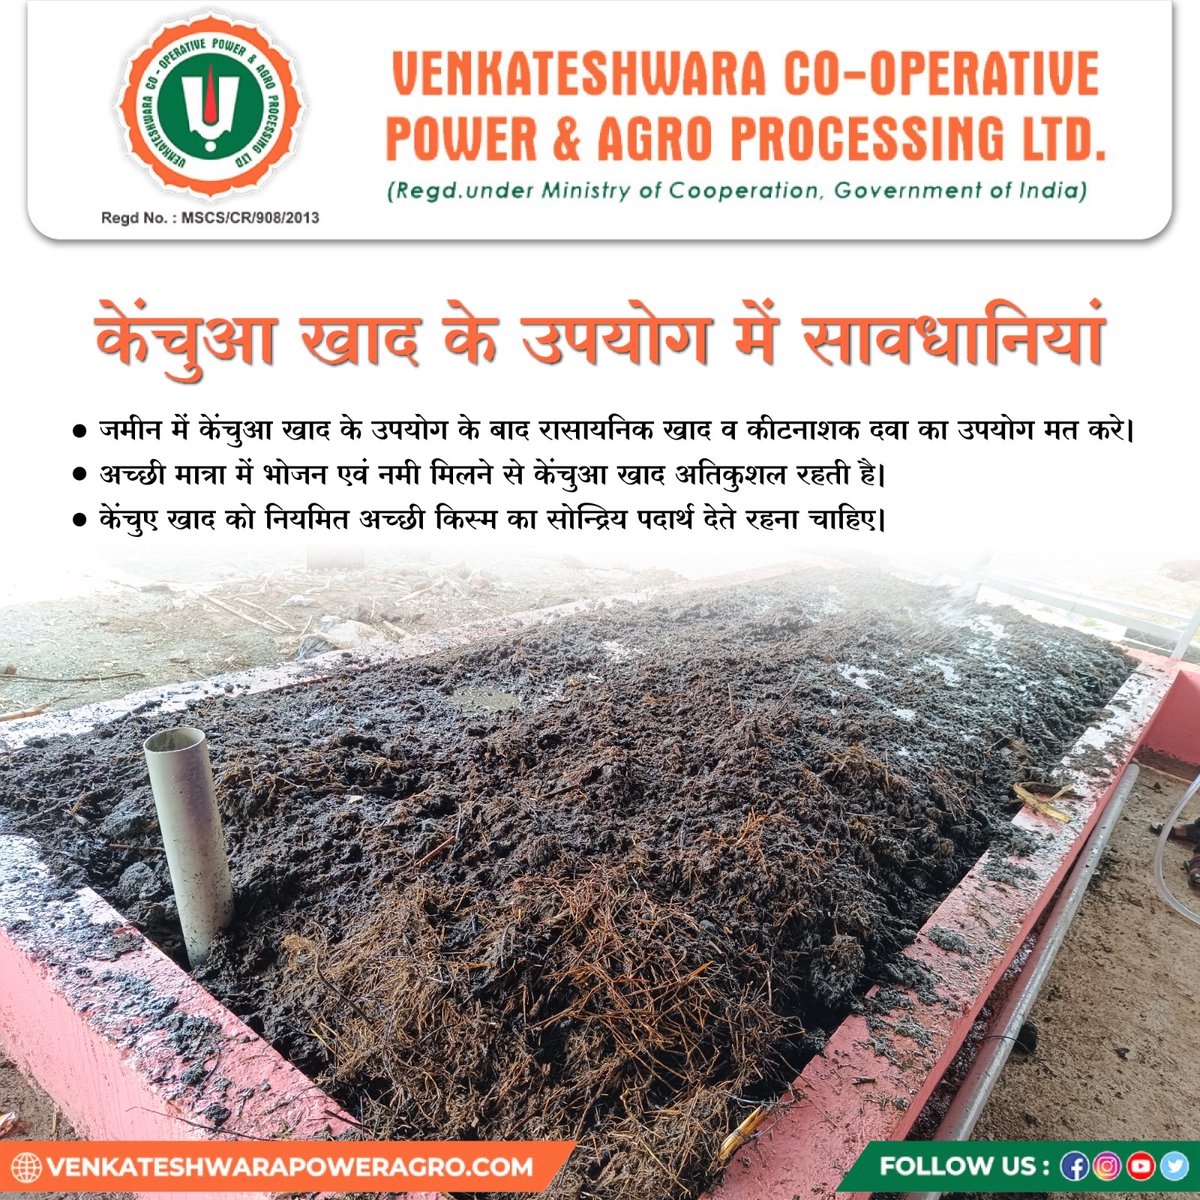 Handle with Care: Tips for Using Vermicompost 
1. After using vermicompost in soil, Don't Use  chemical fertilizers and pesticides.
2. Balanced meals and moisture keep vermicompost thriving. 
3. Keep feeding your soil the golden touch of quality vermicompost regularly.